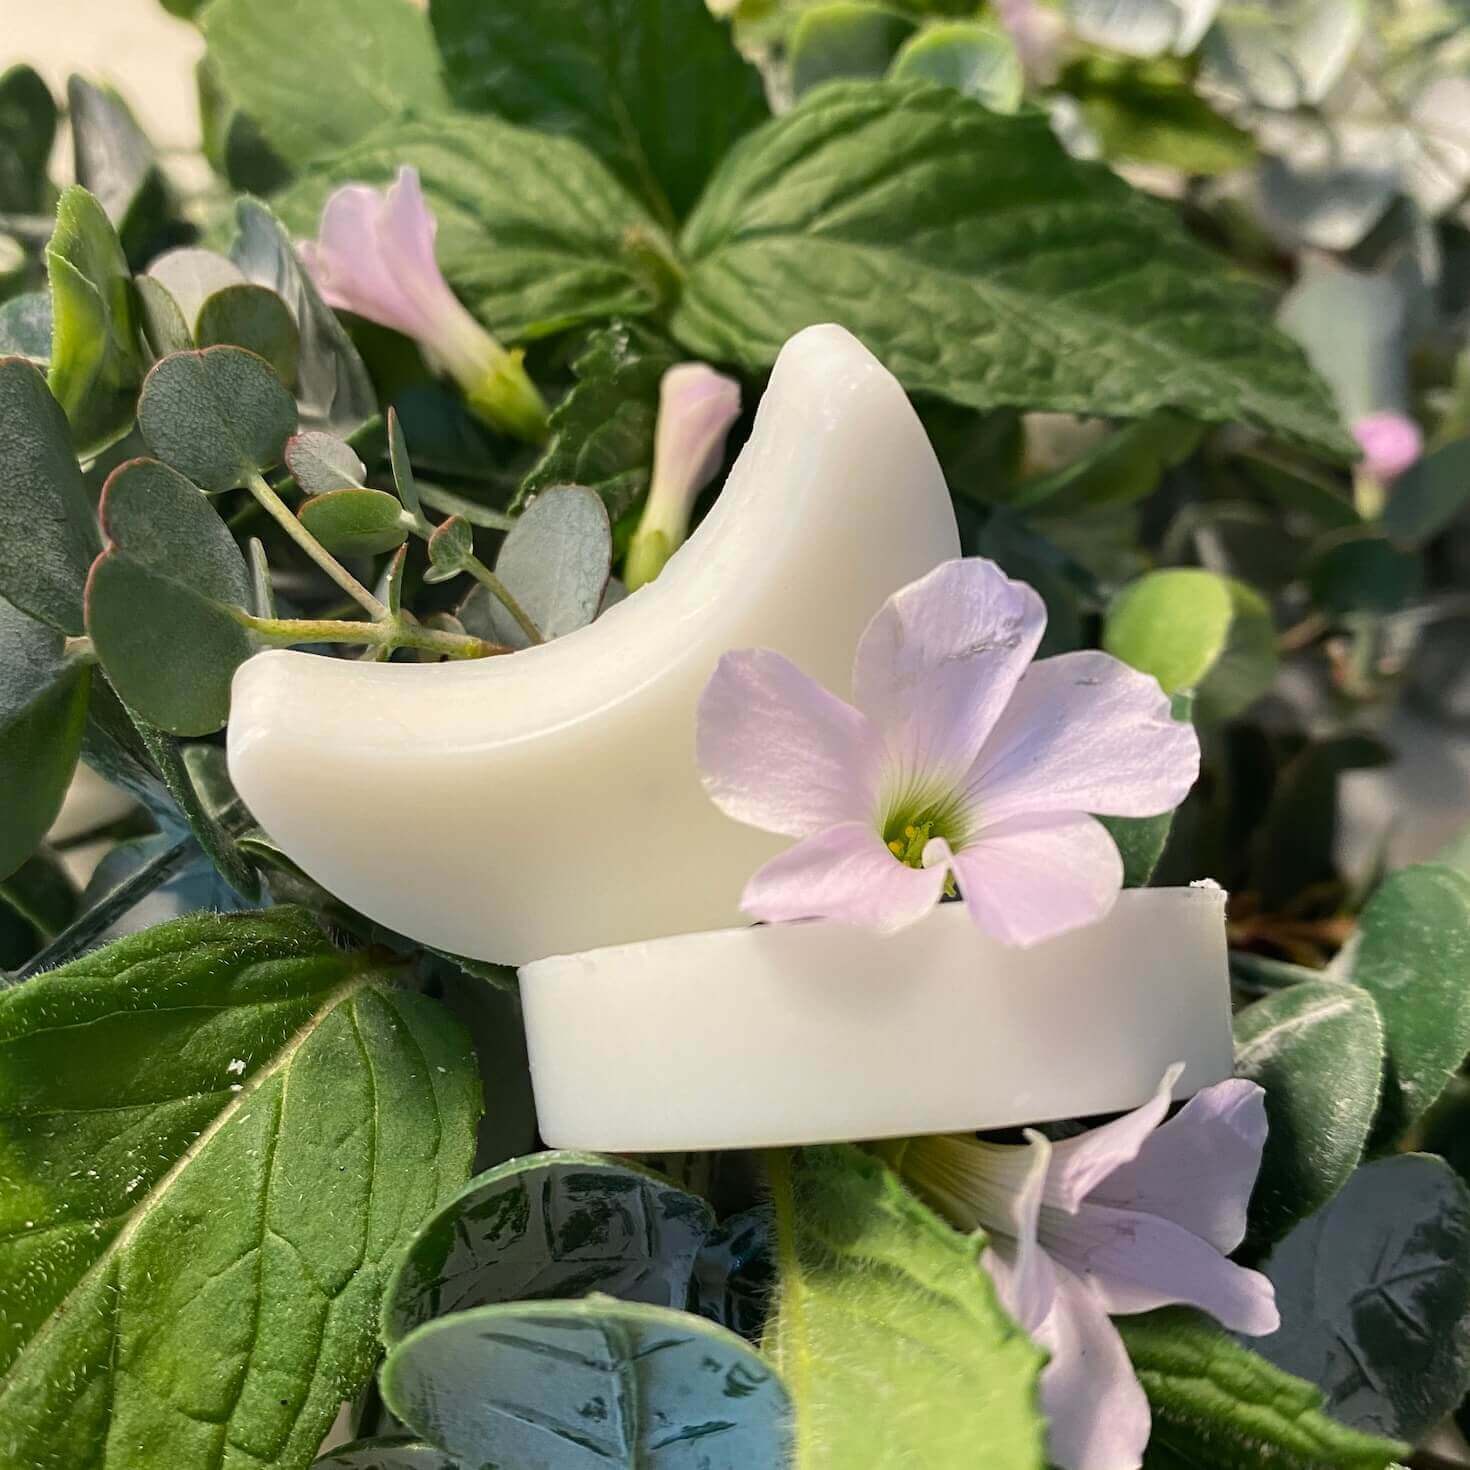 Wax melts with a fresh fragrance of wild gardens wet after rain